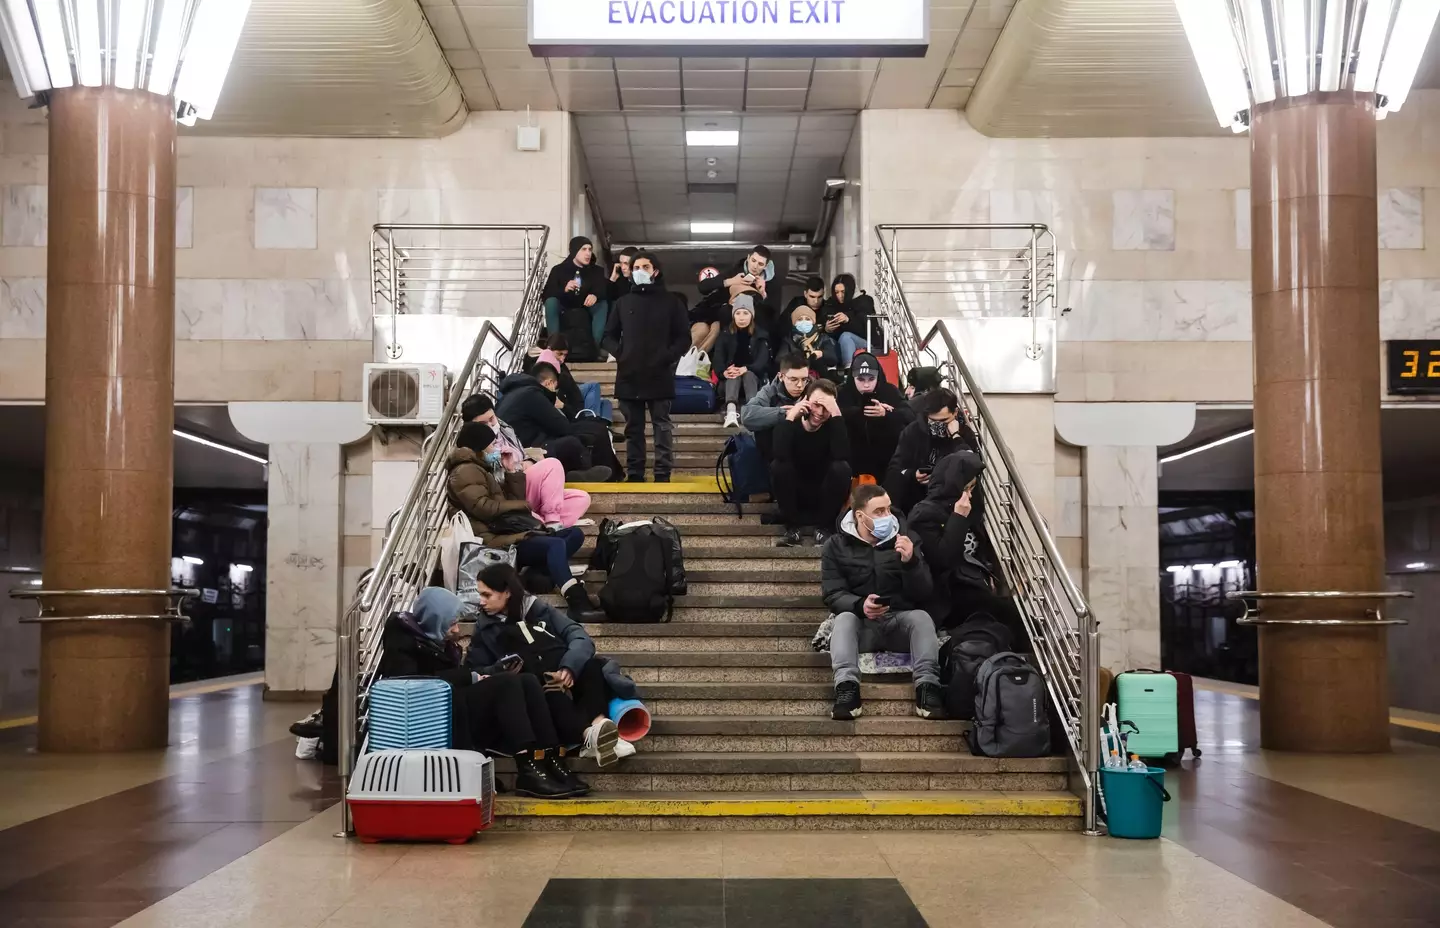 Subway station serves as a shelter for thousands of people (Alamy)